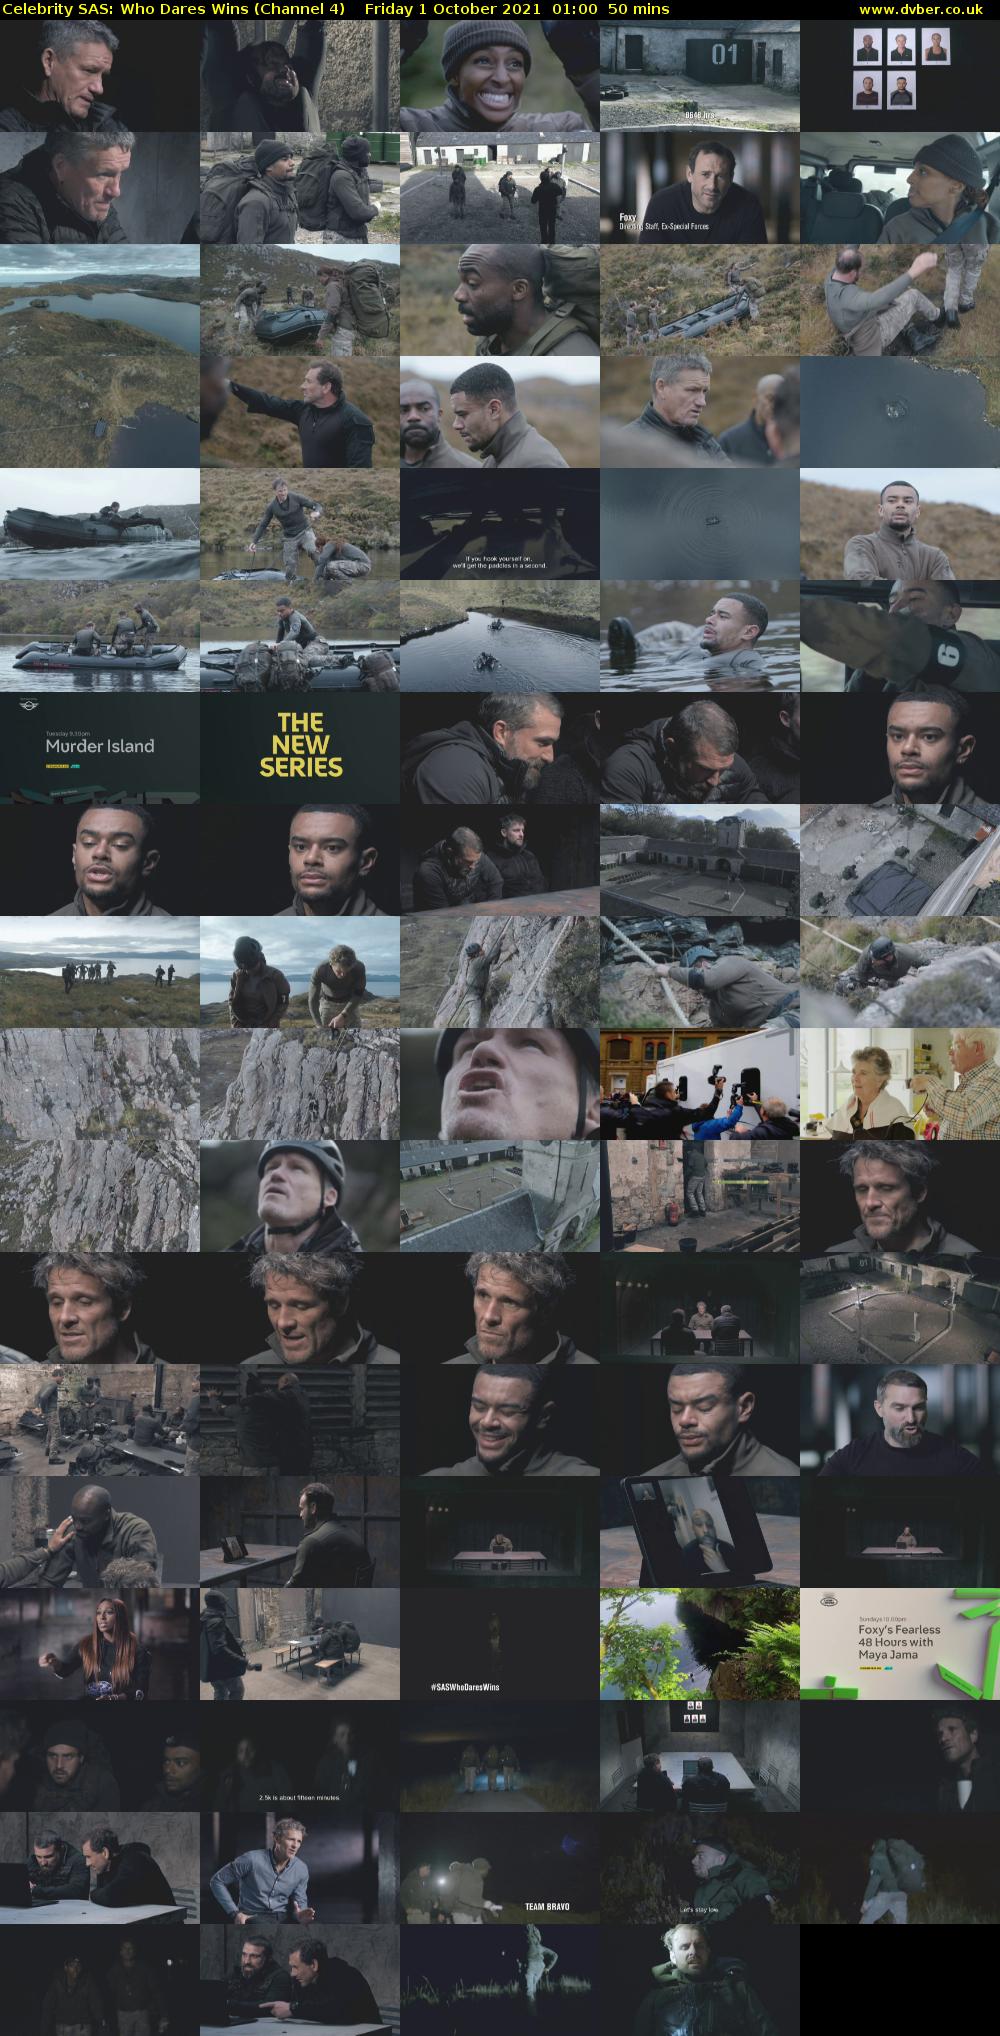 Celebrity SAS: Who Dares Wins (Channel 4) Friday 1 October 2021 01:00 - 01:50